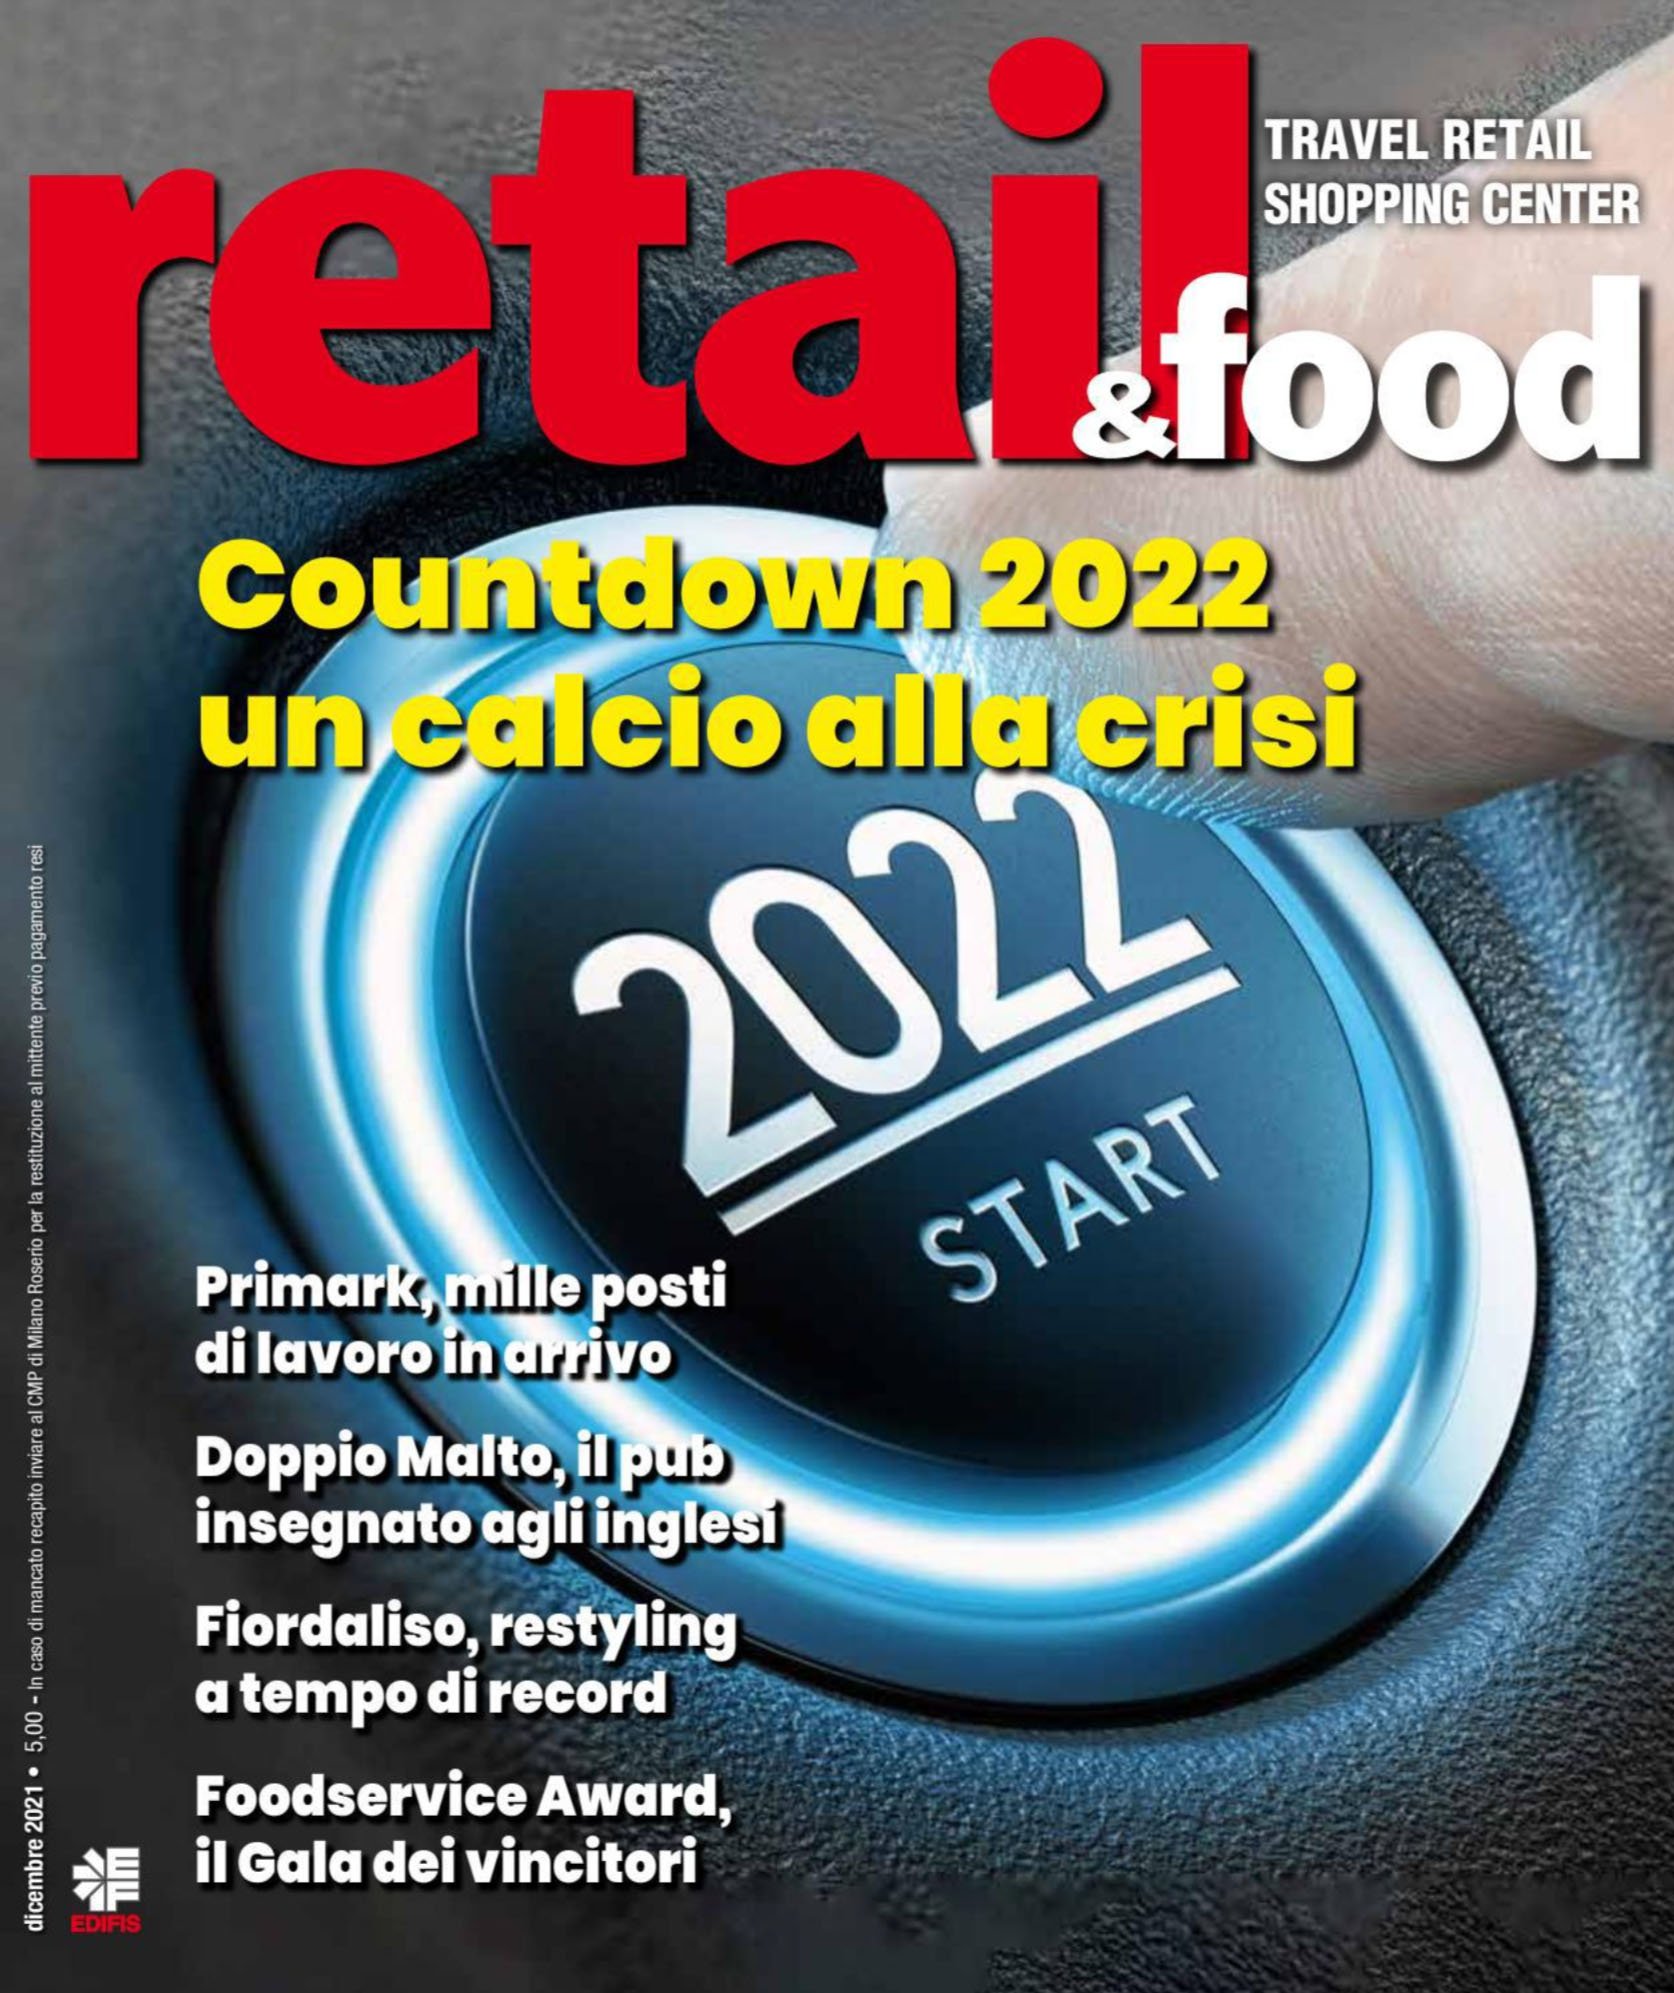 Collection Celeste in Retail & Food magazine